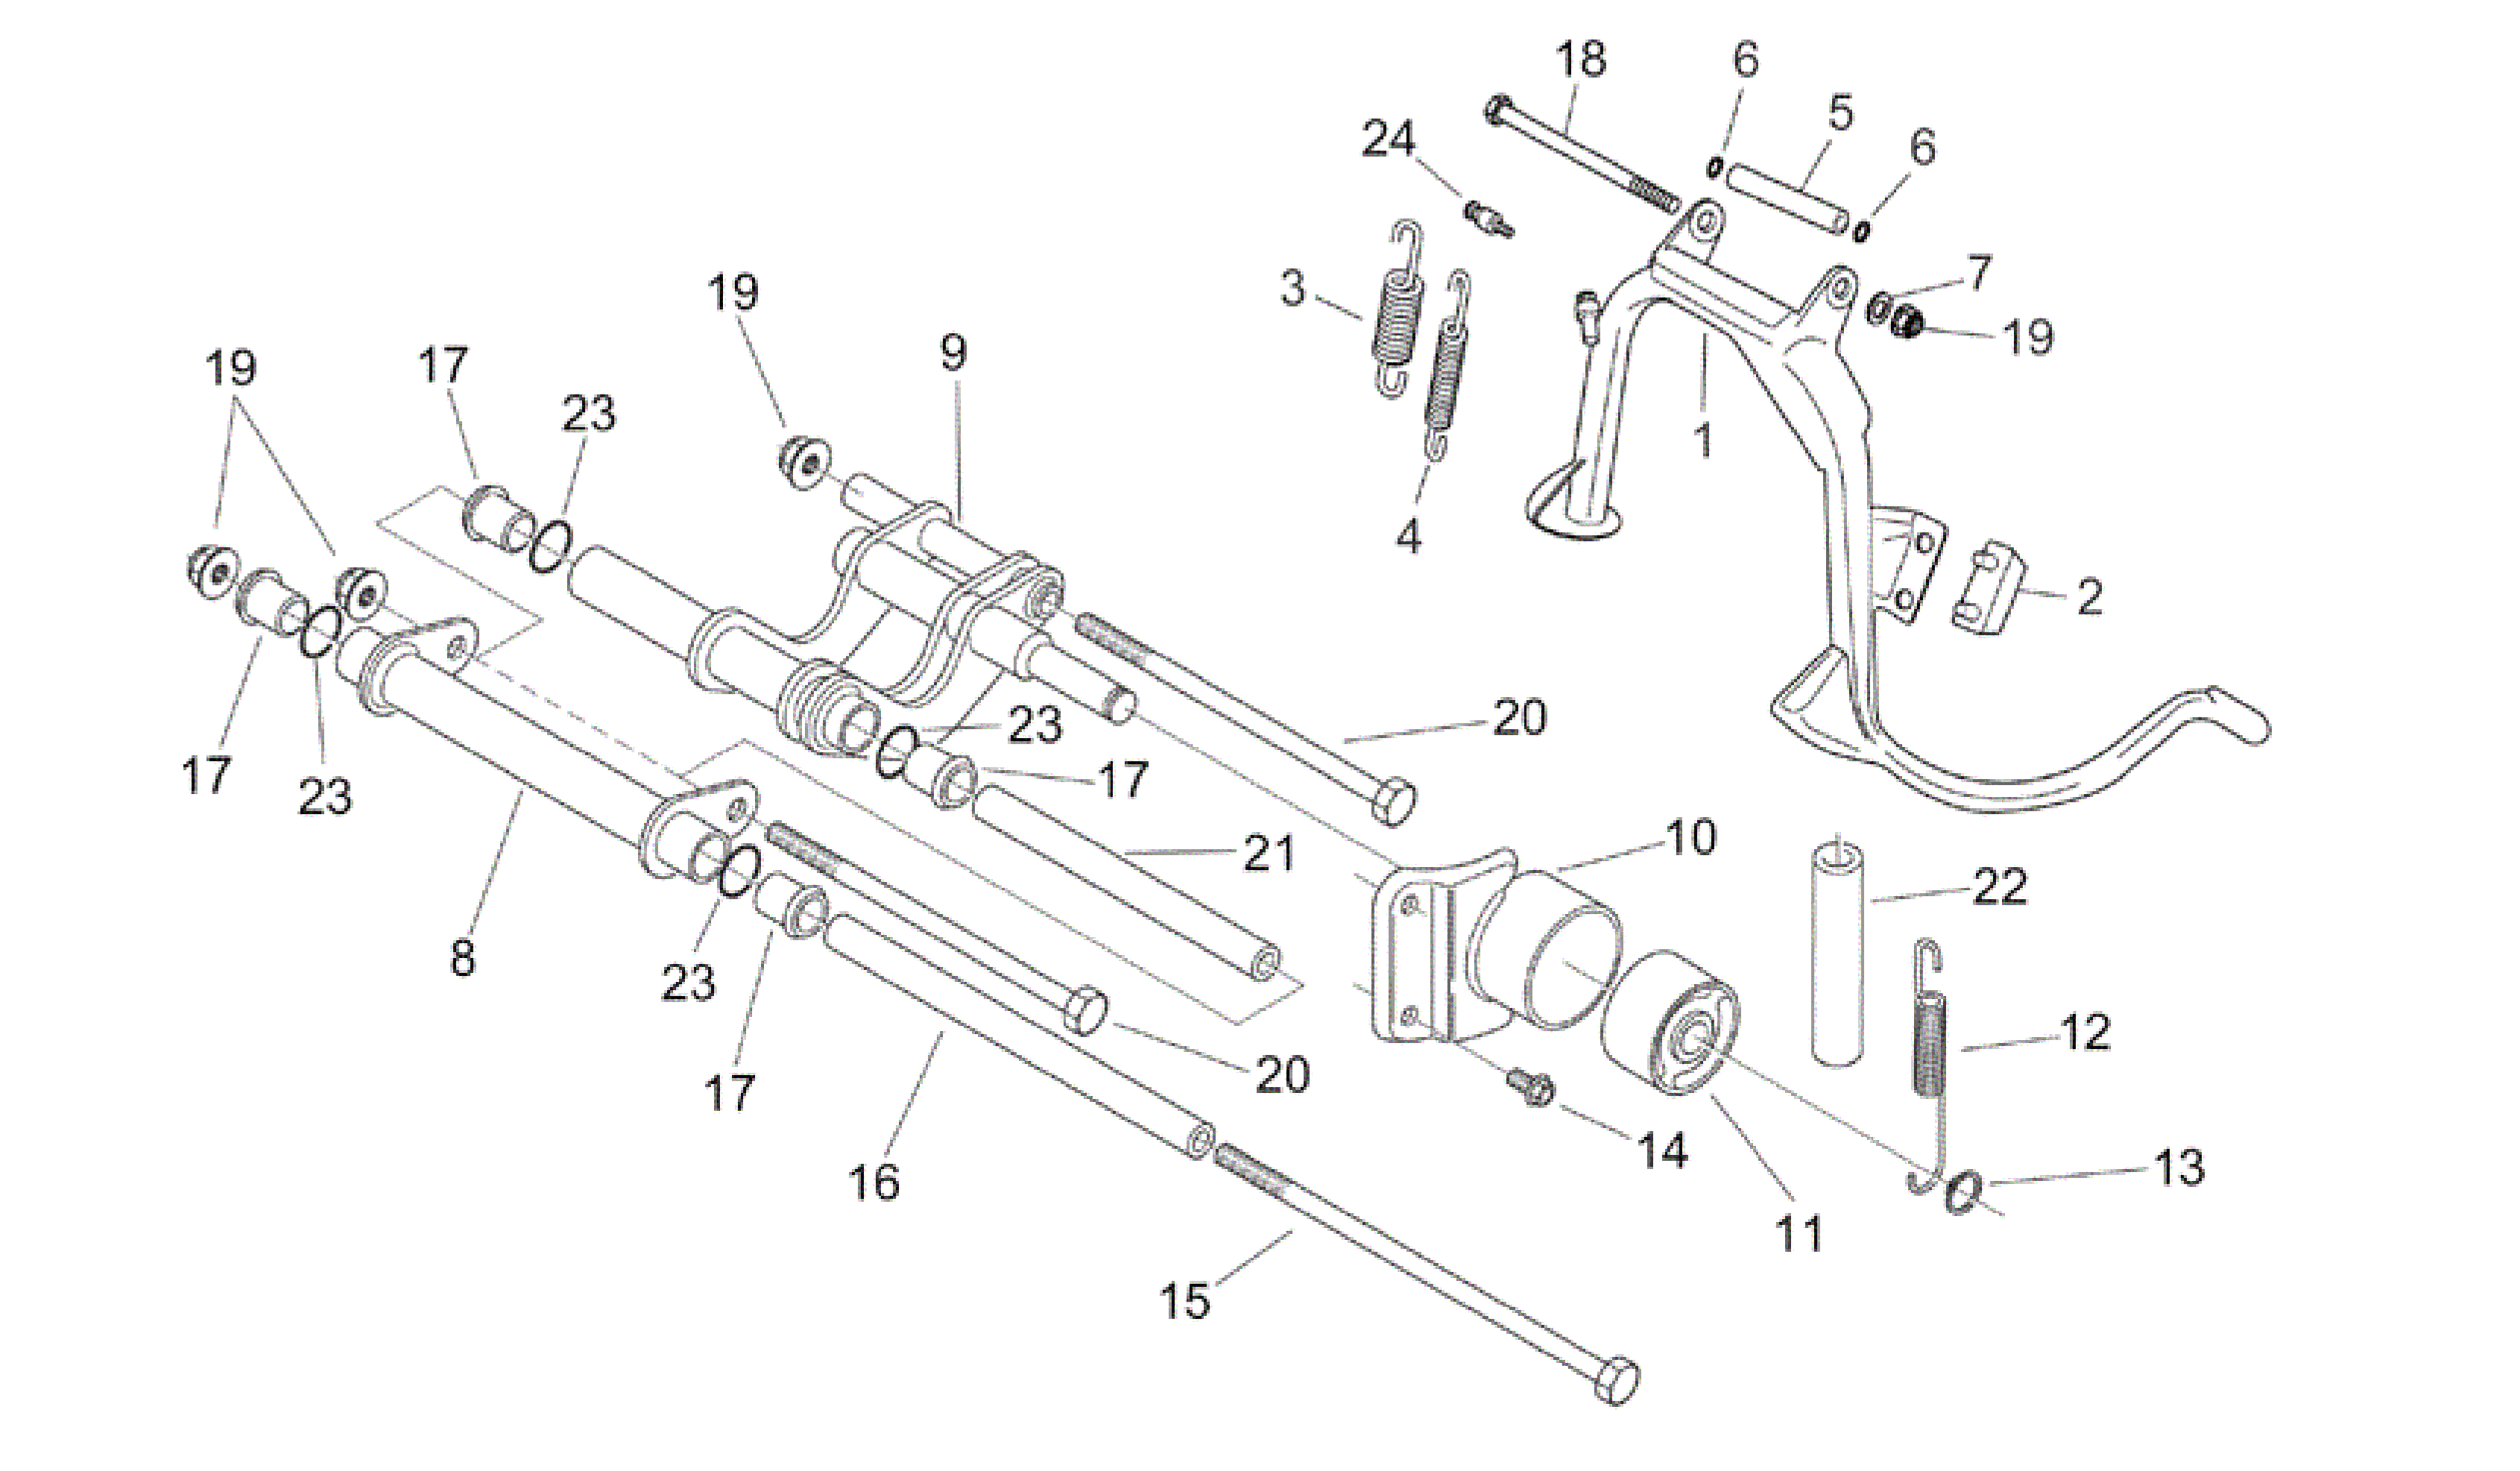 Central stand - Connecting rod